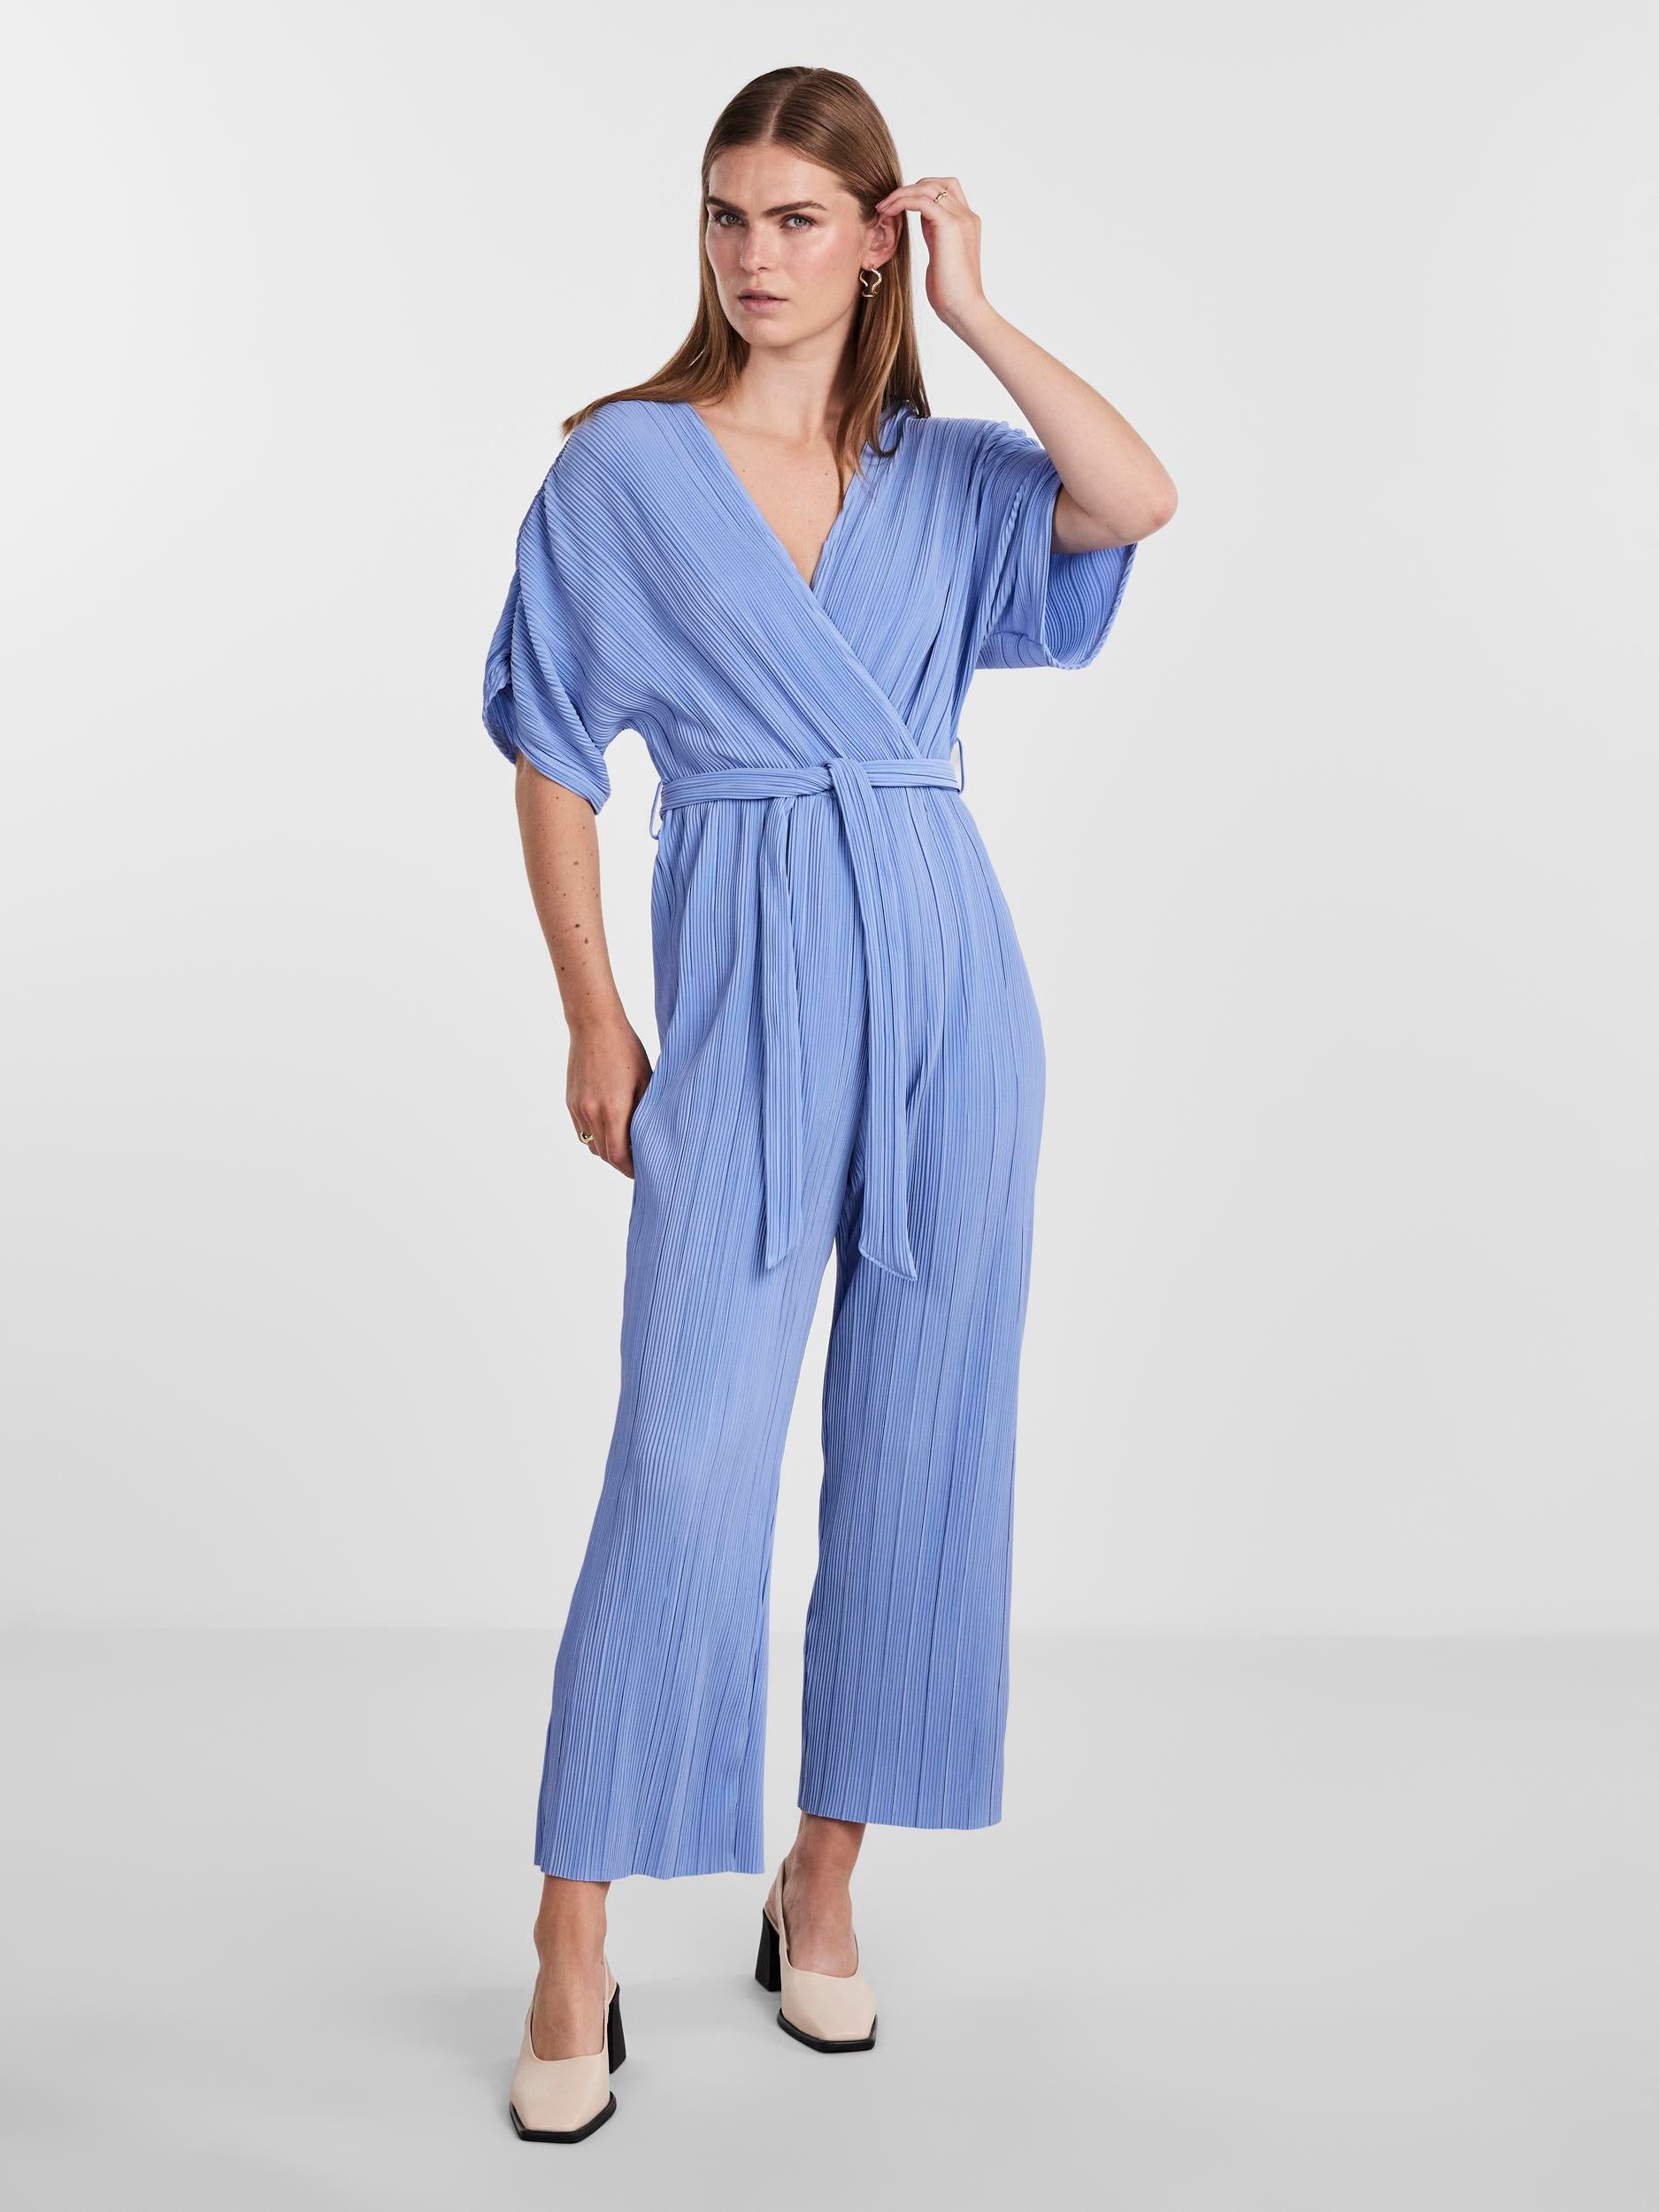 Y.A.S | OLINDA SS ANKLE JUMPSUIT - ASHLEIGH BLUE